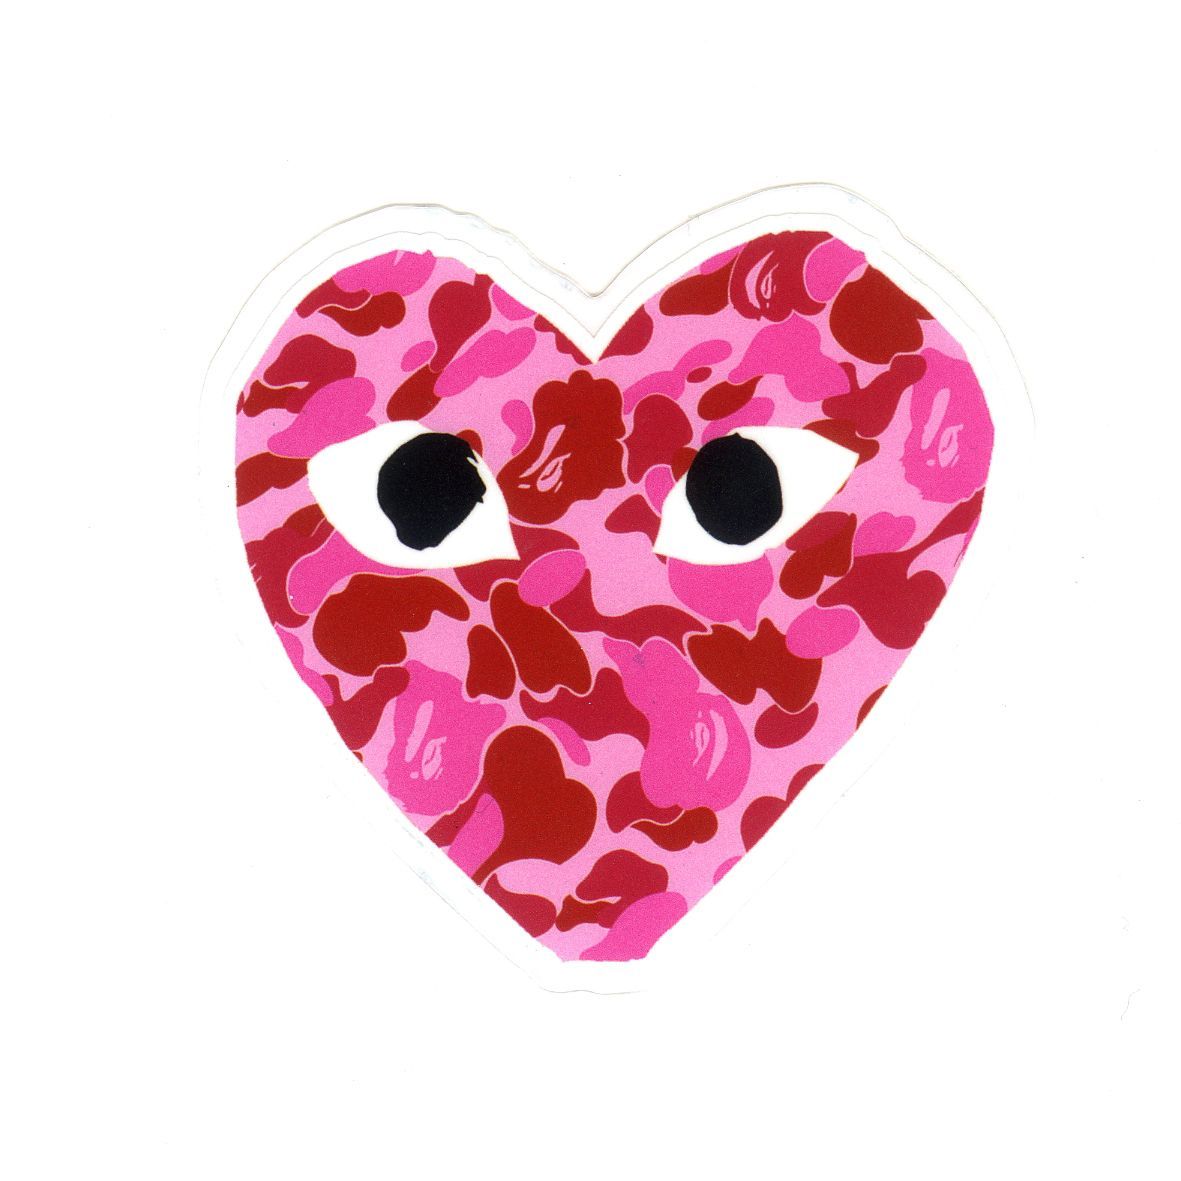 comme des garcons x A Bathing Ape Pink Camo, Height 7 cm, decal sticker. Bape wallpaper iphone, Picture collage wall, Cute wallpaper